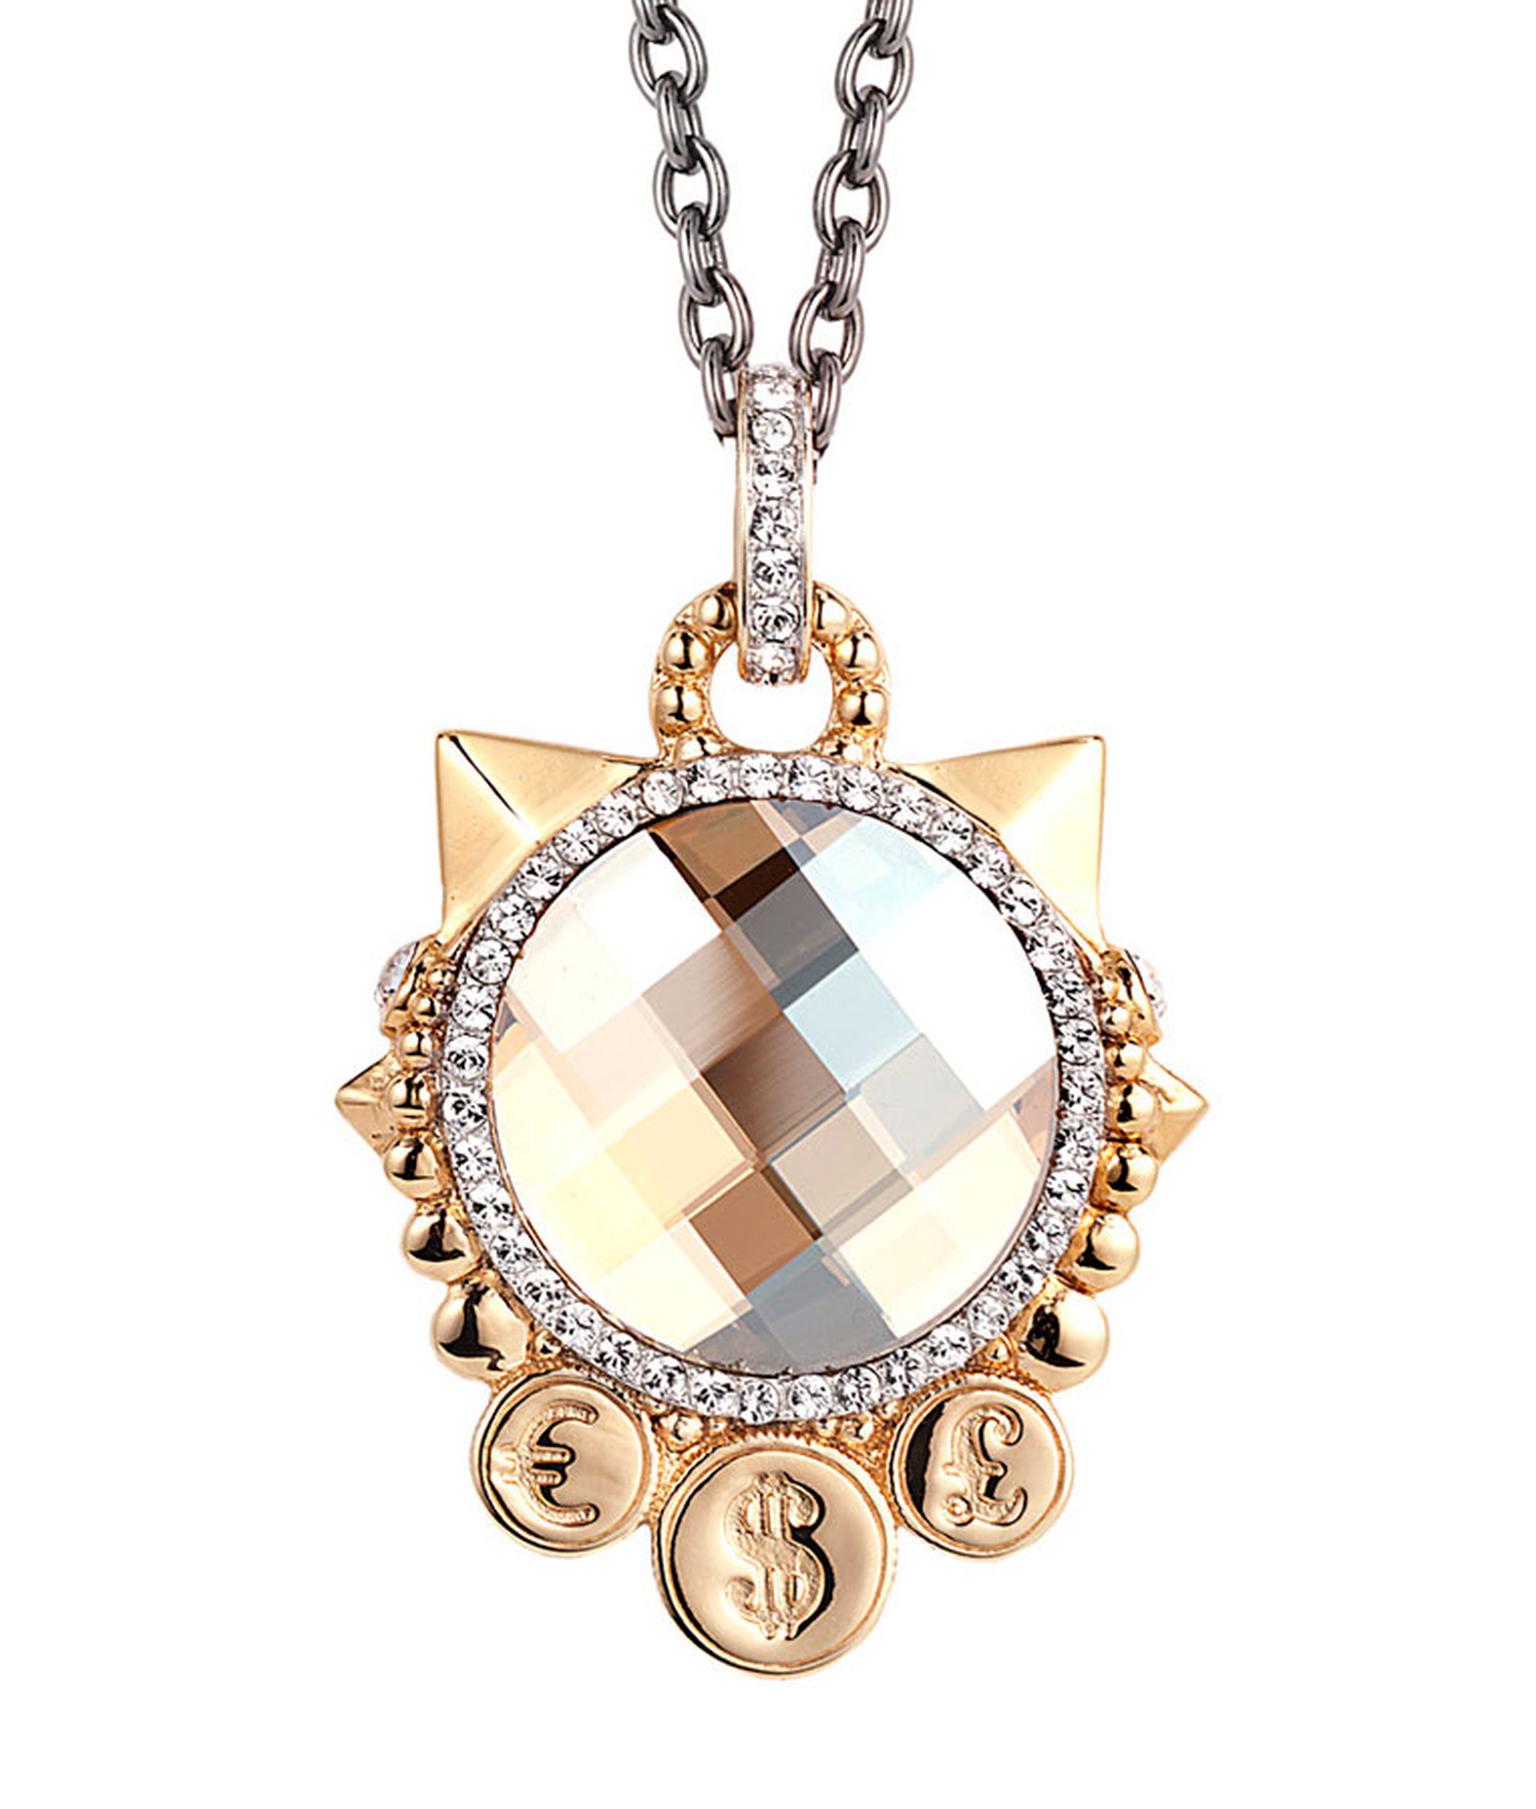 Stepehen Webster Seven Deadly Sins Greed Pendant set in sterling silver with pave crystals 650